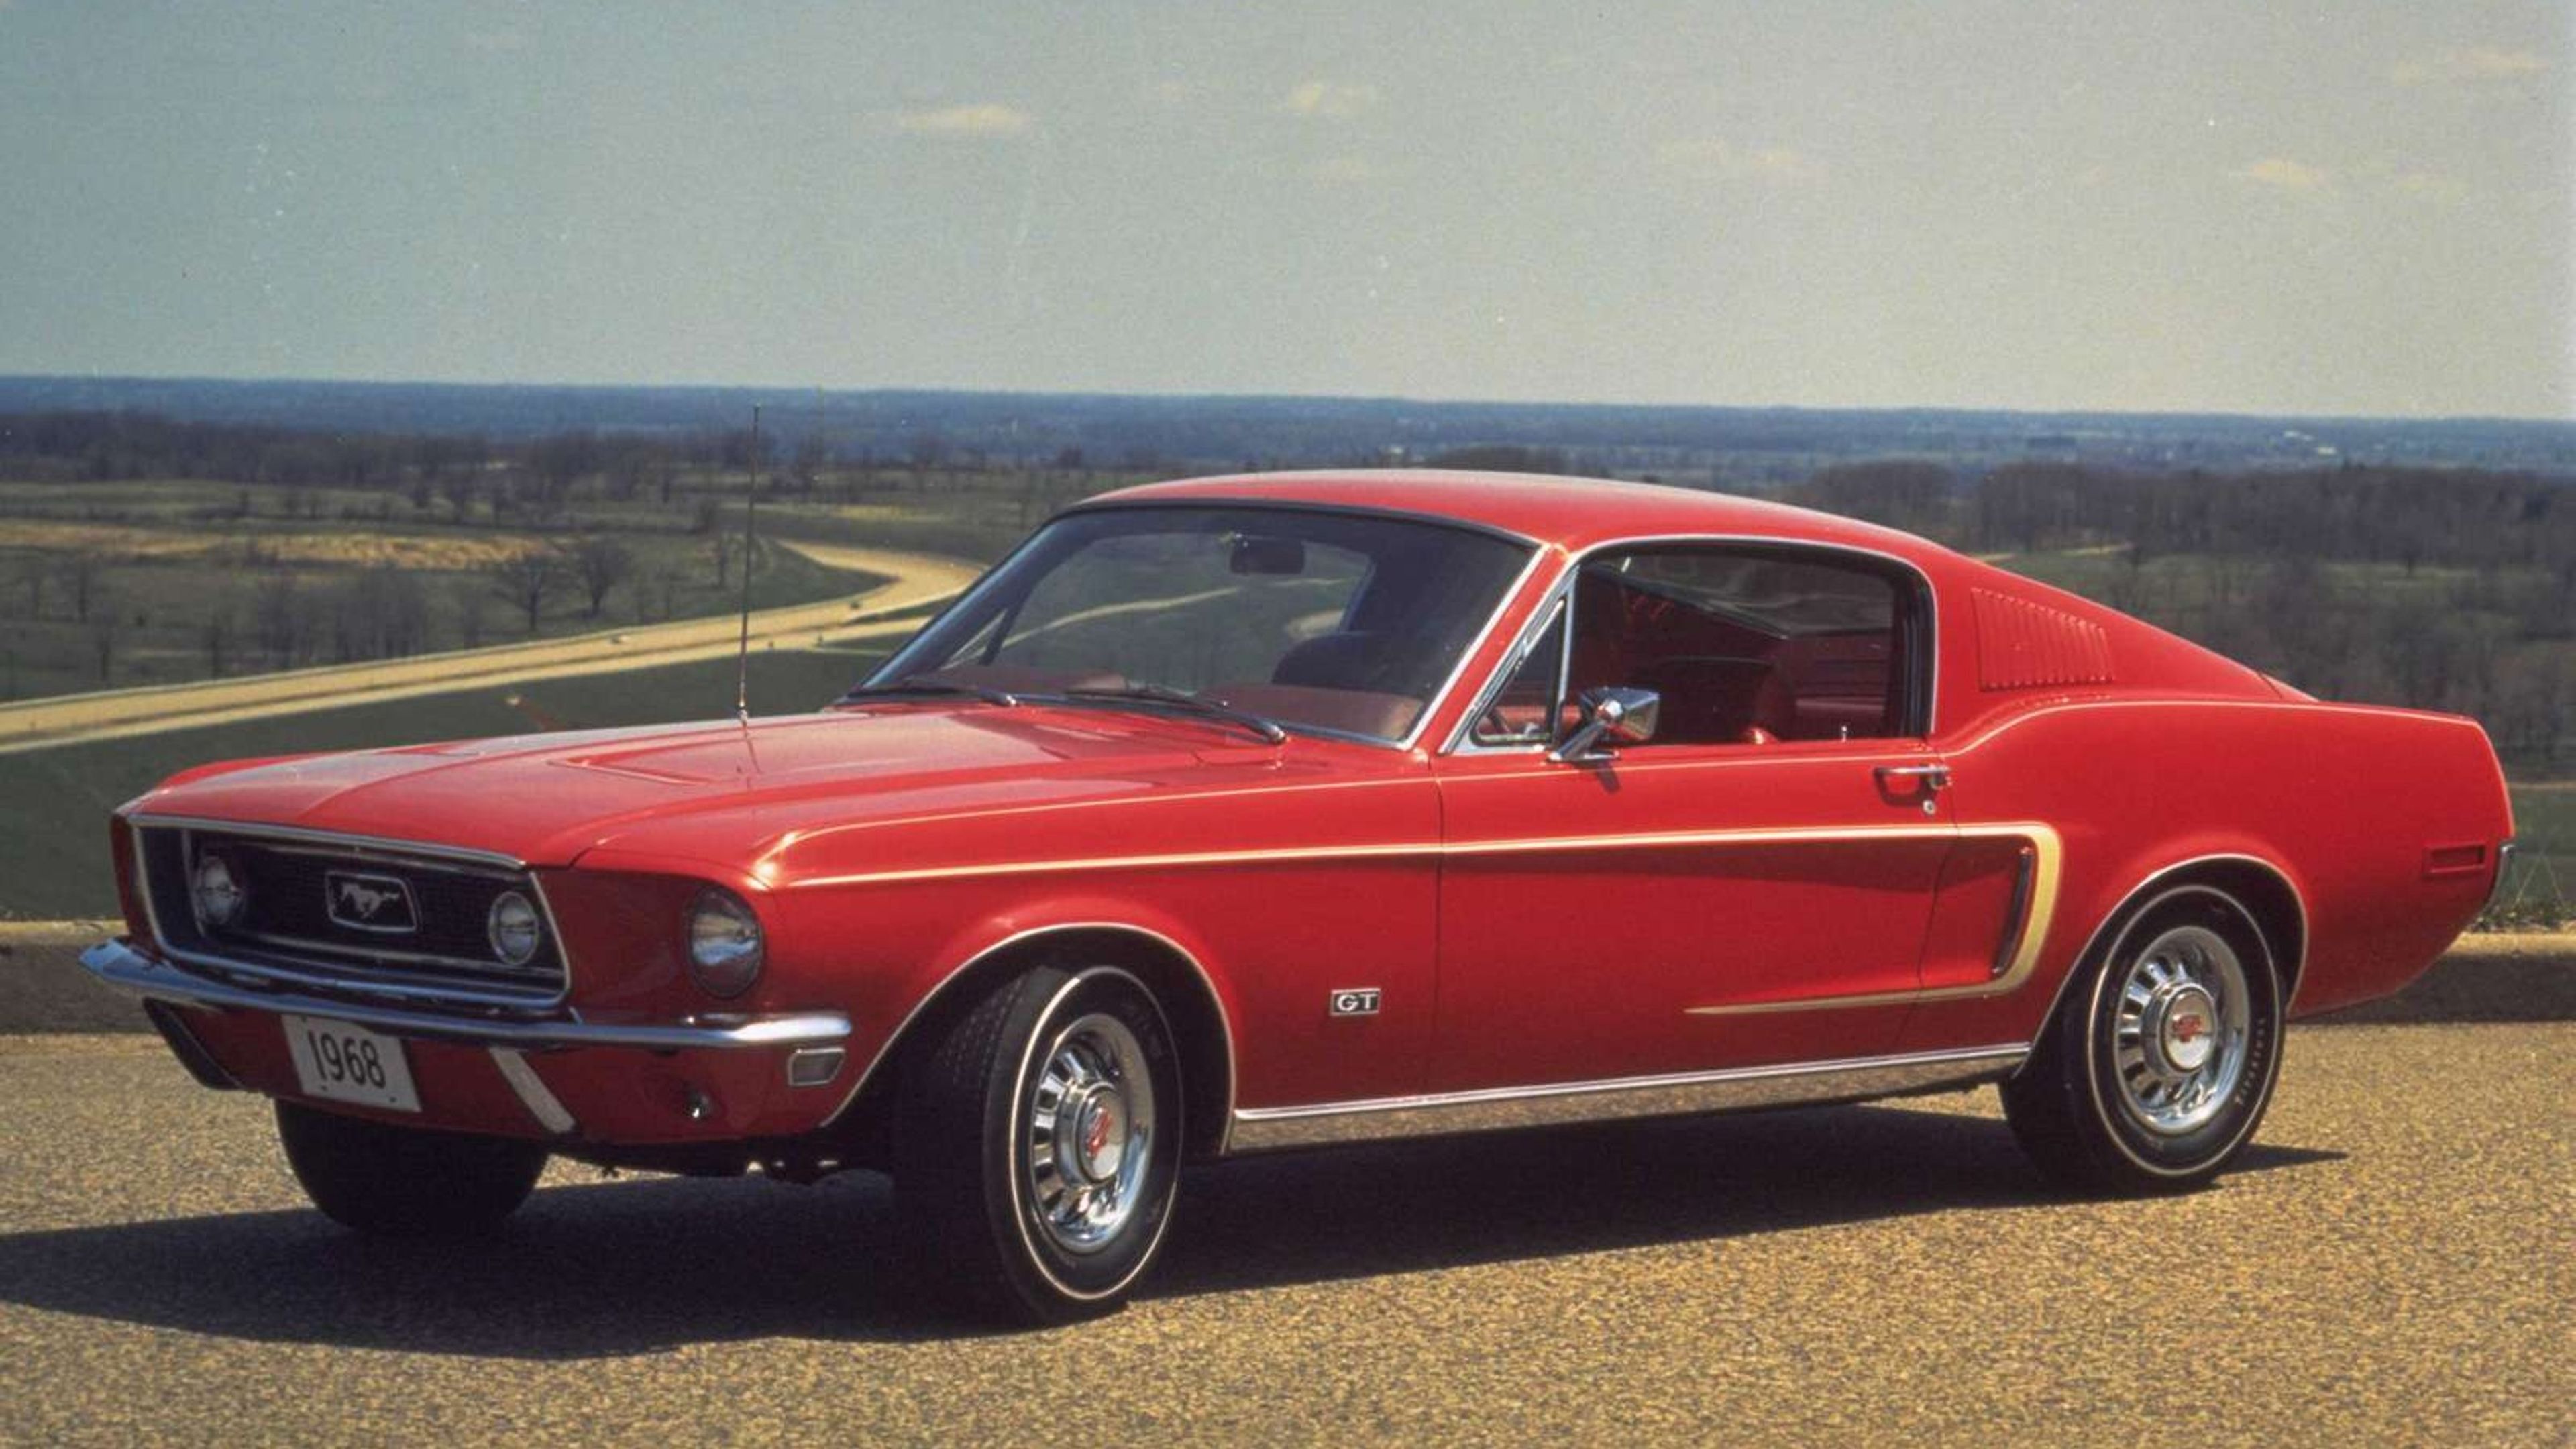 historia-ford-mustang-60-anos-3306695.jp